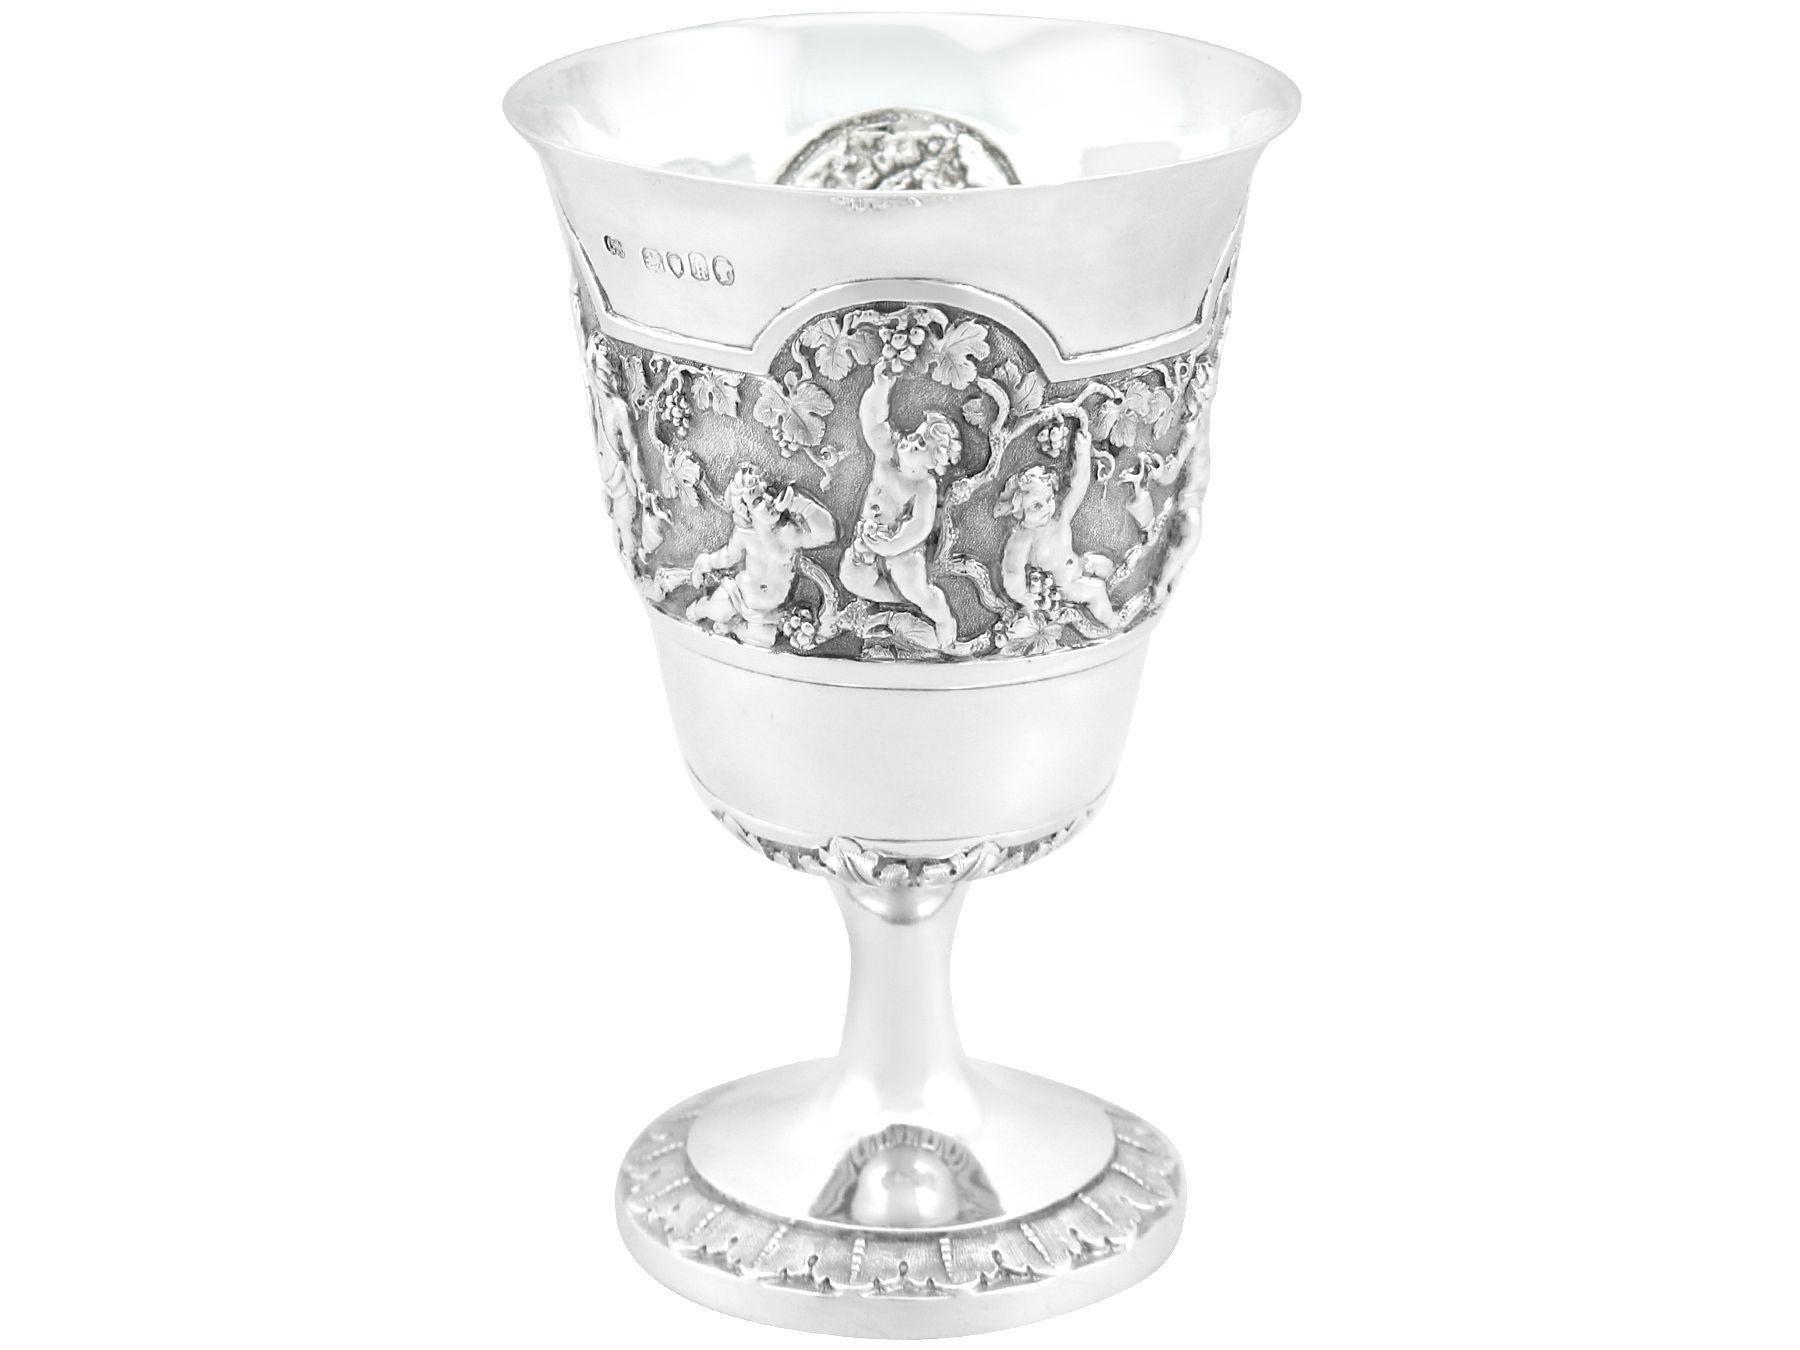 An exceptional, fine and impressive antique Victorian English sterling silver goblet made by George Adams; an addition to our collection of wine and drinks related silverware 

This exceptional antique Victorian sterling silver goblet has a